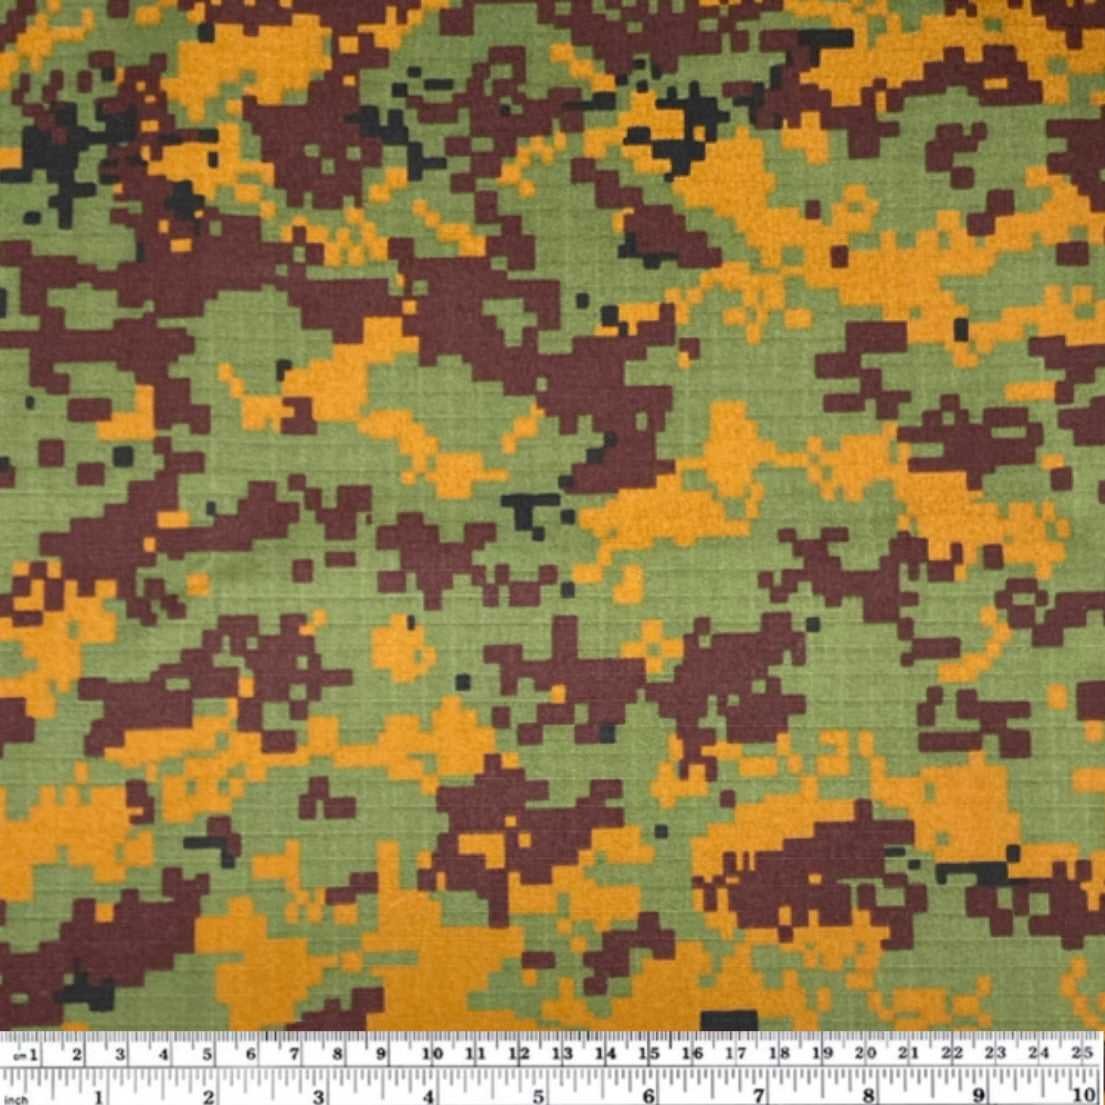 Printed Ripstop Cotton Canvas - Digital Camouflage